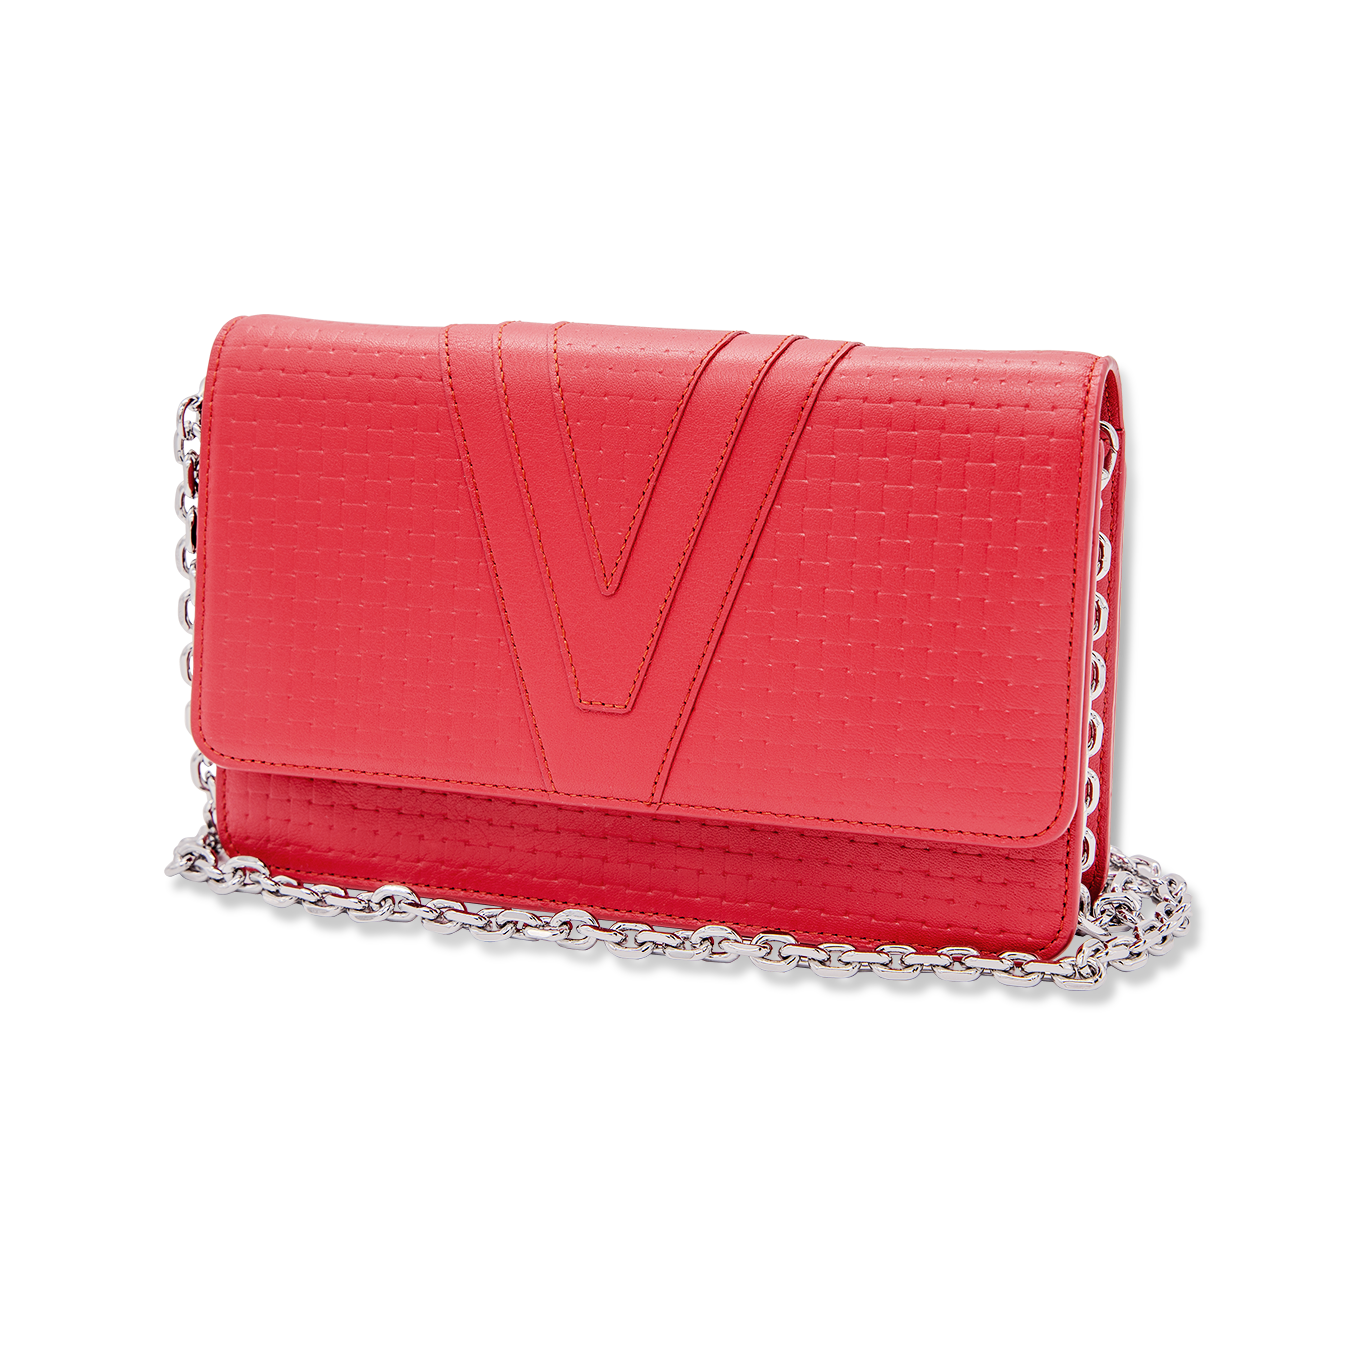 ORNATO CHAIN CROSS BAG  [RED] with Silver Chain